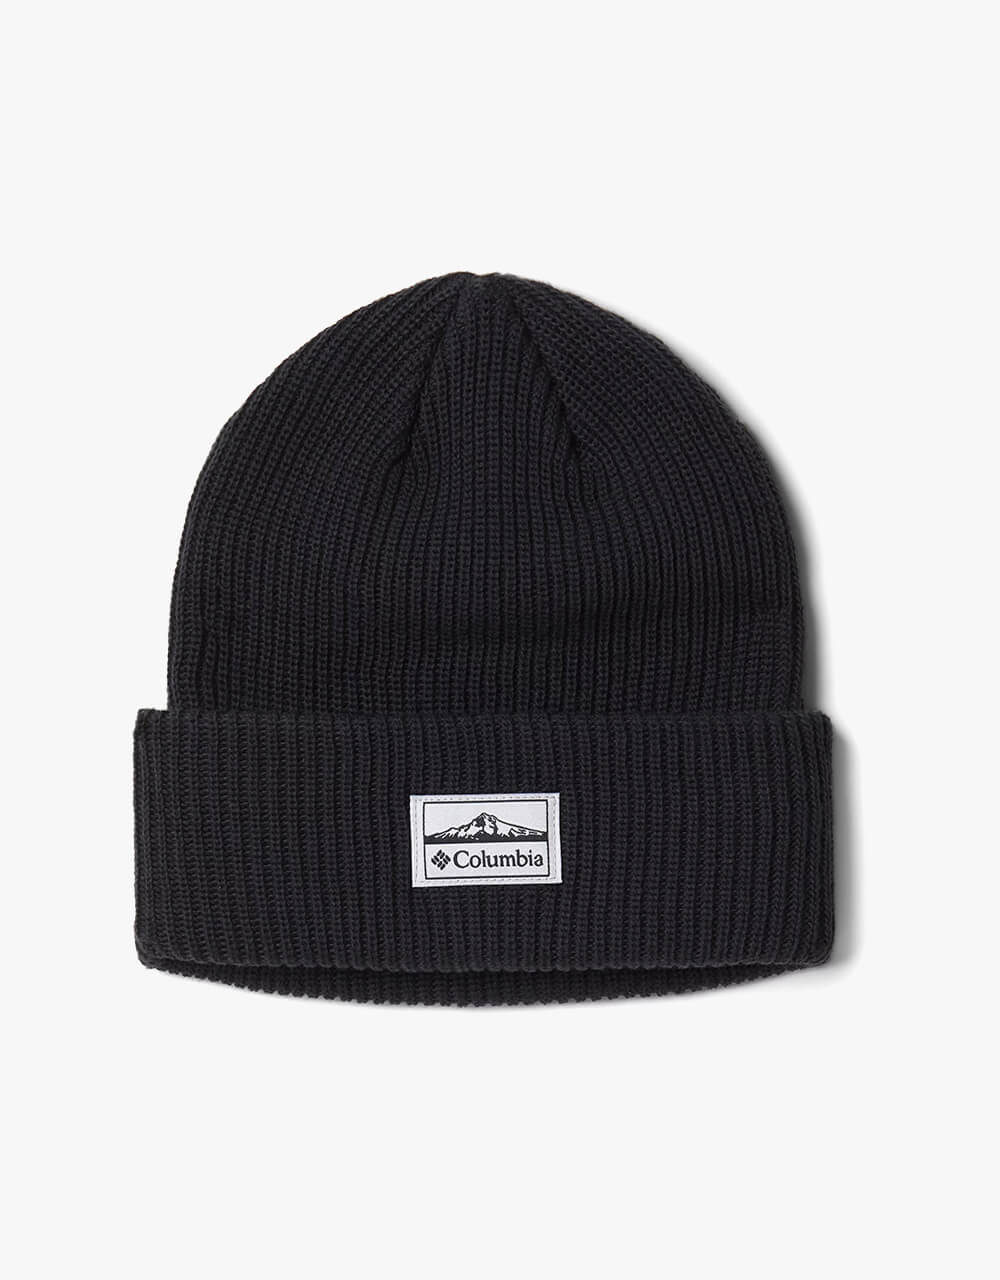 Columbia Lost Lager ™ Beanie - Black